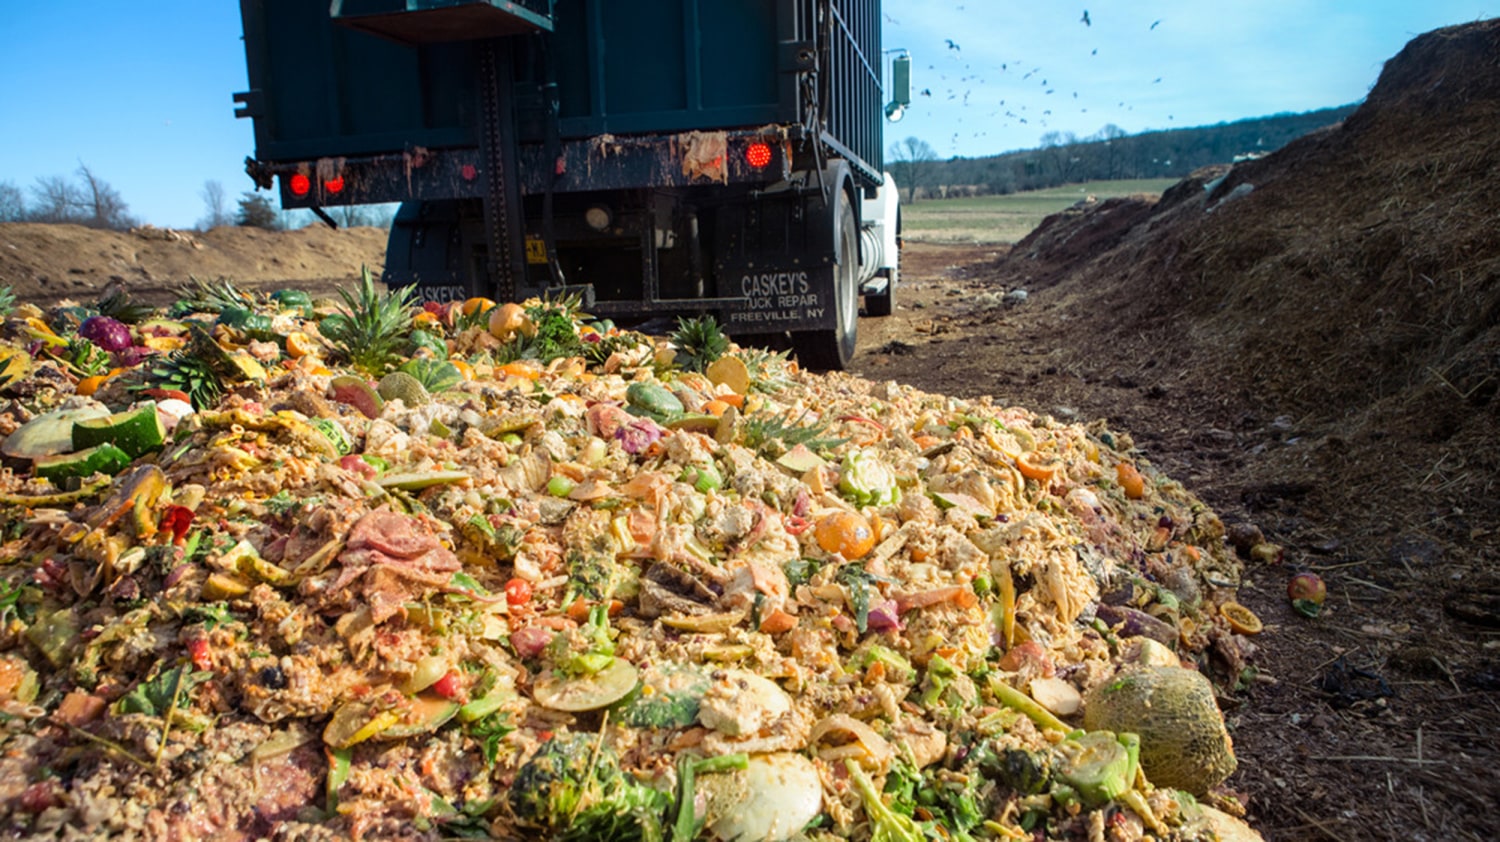 The simple way we might turn food waste into green energy